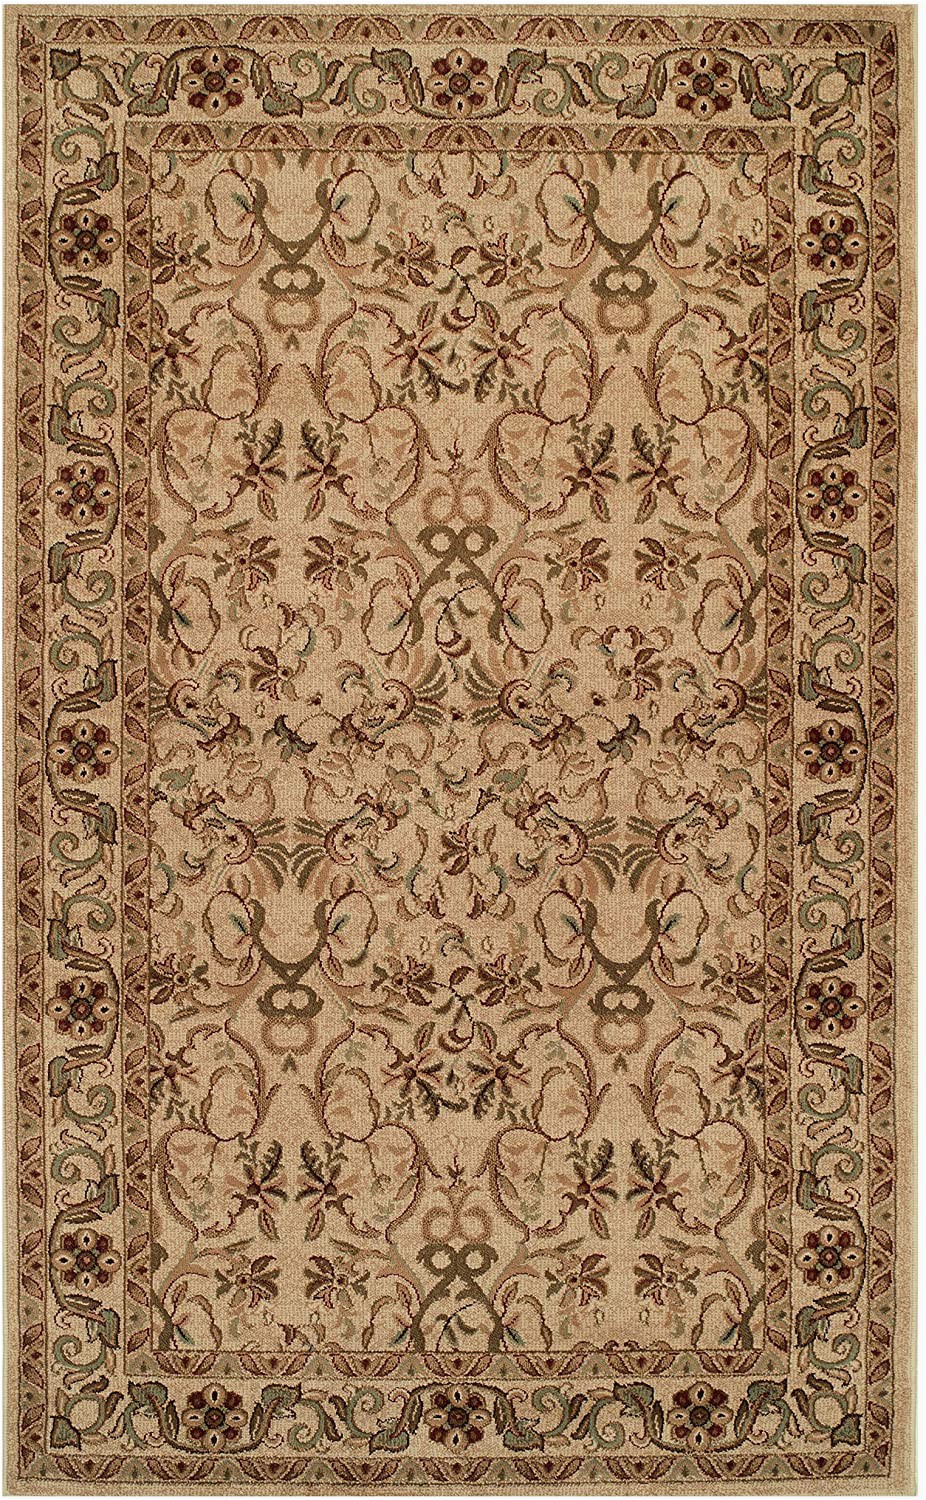 Best Deals On 8×10 area Rugs Superior Heritage 8 X 10 Ivory area Rug Contemporary Living Room & Bedroom area Rug Anti Static and Water Repellent for Residential or Mercial